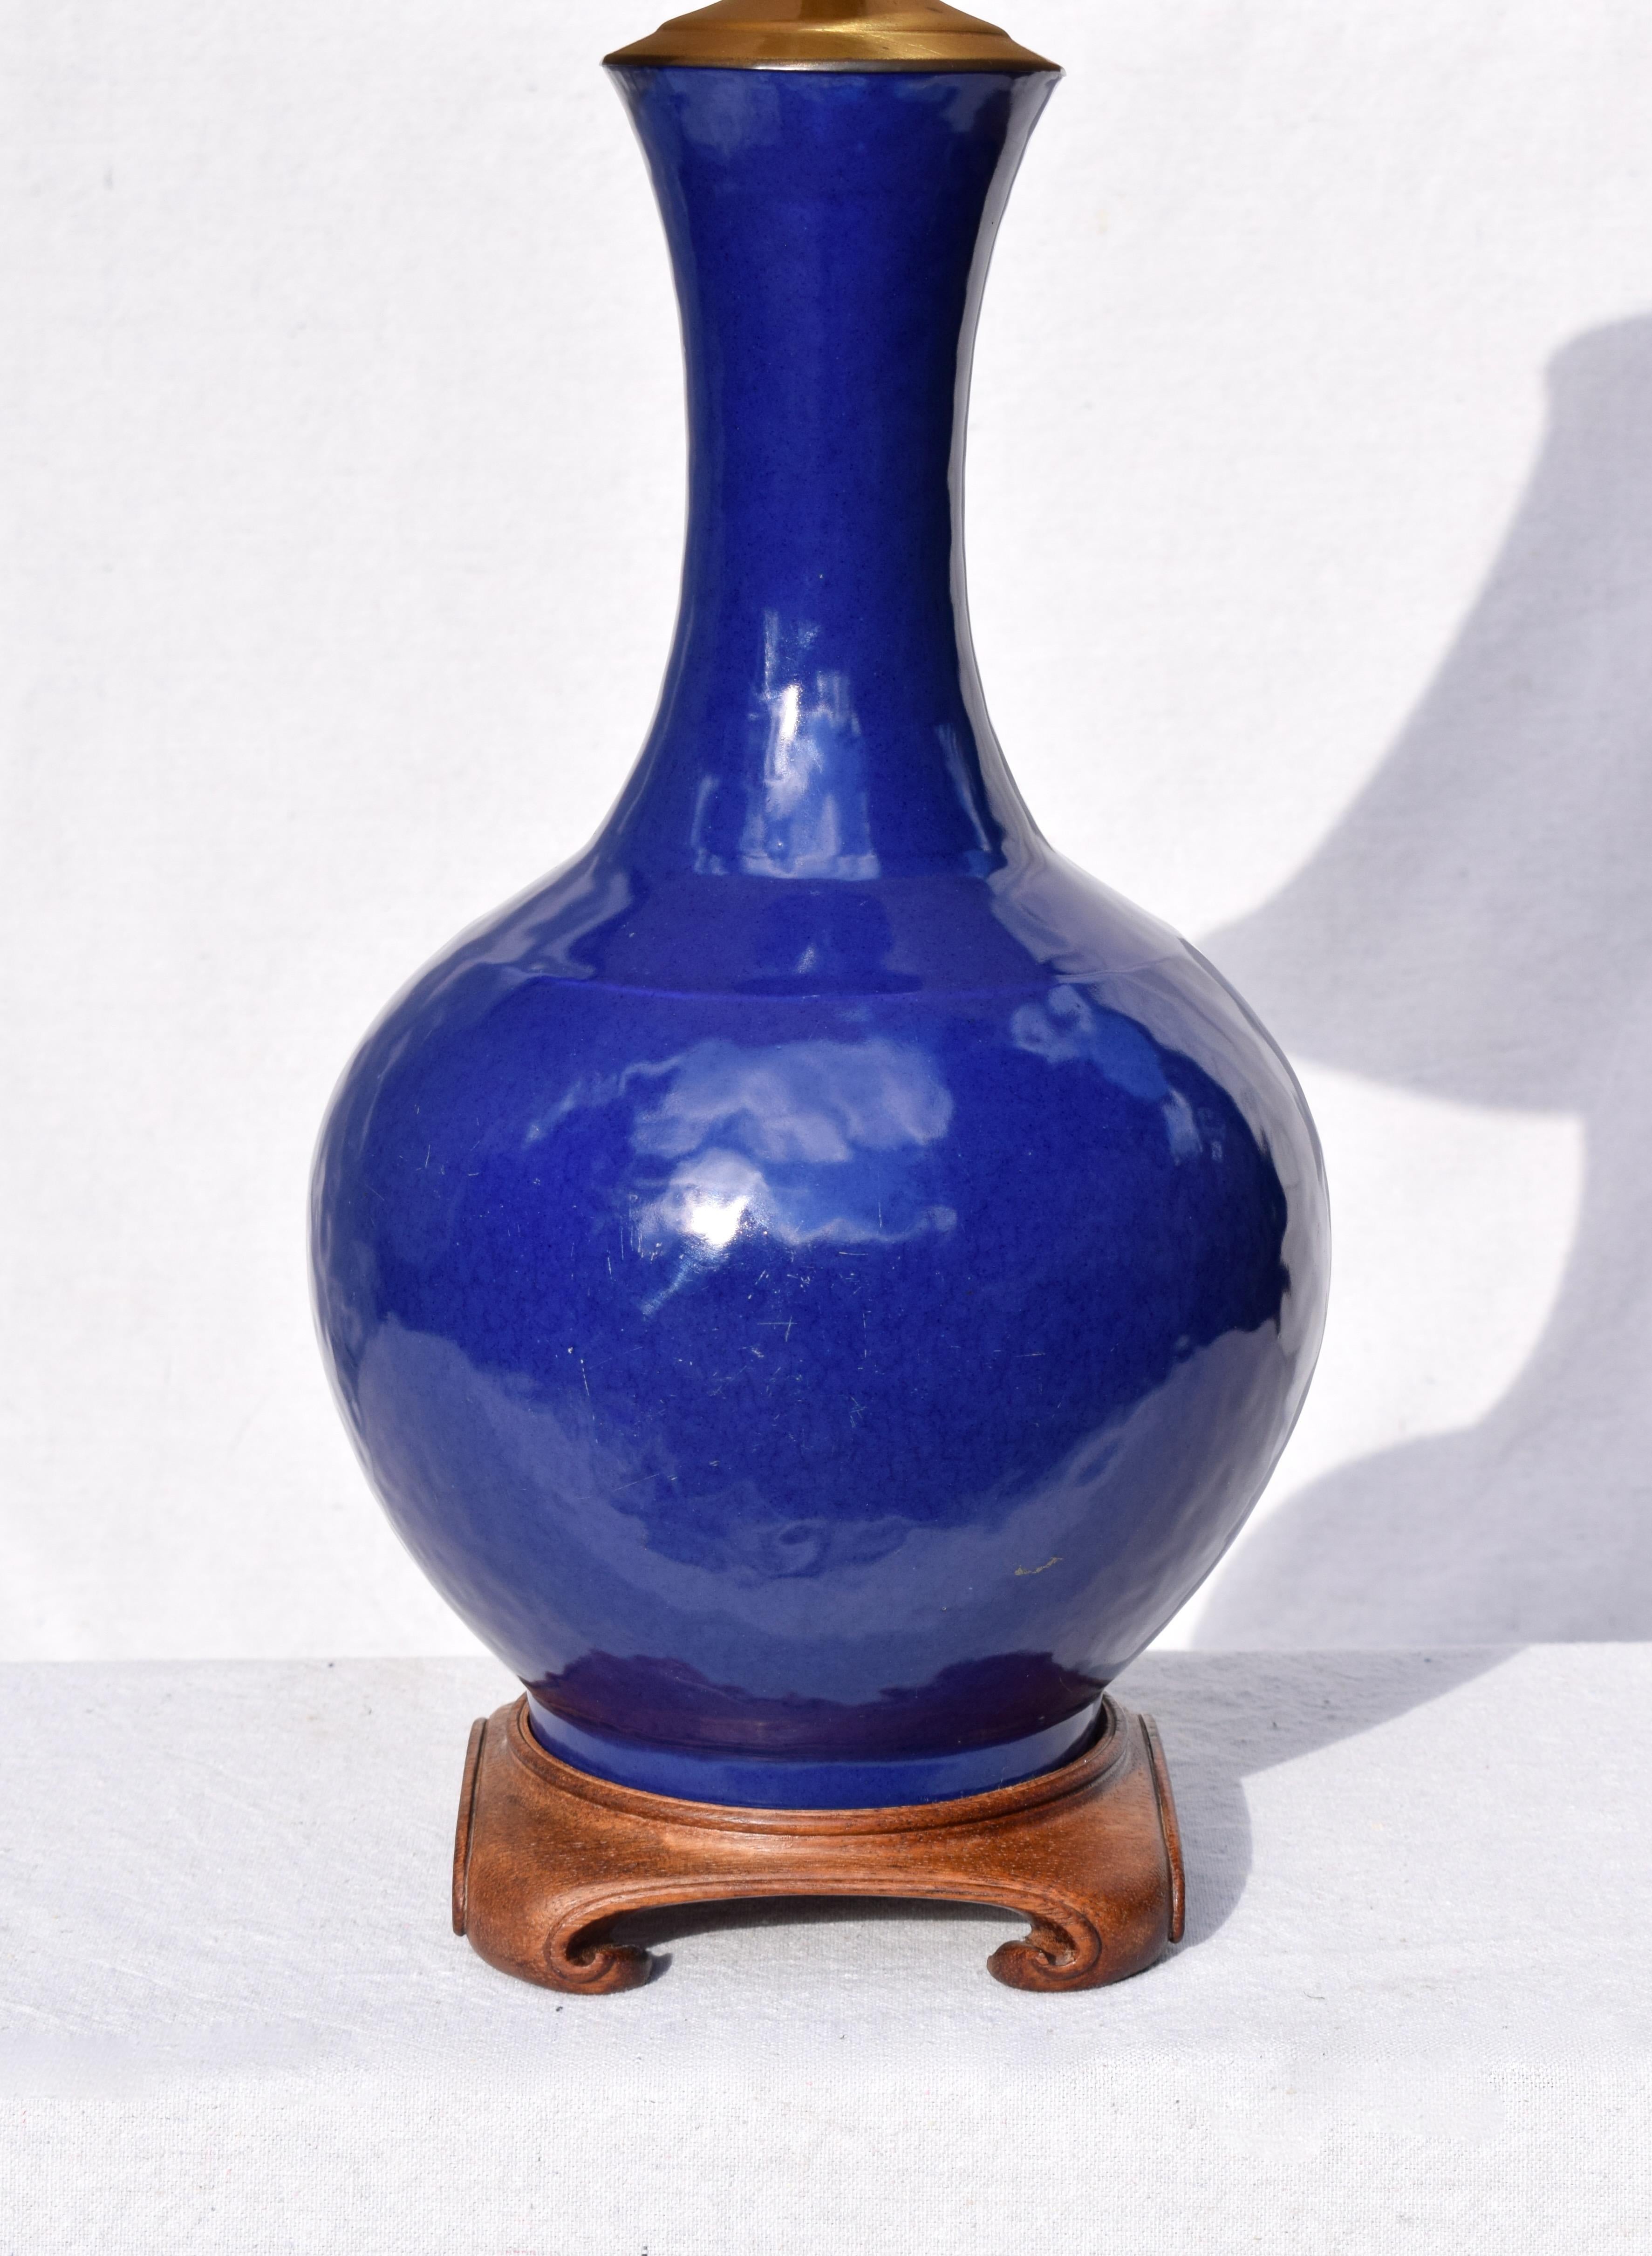 Antique Chinese porcelain bottle shape Cobalt blue table lamp with flared mouth and thick glaze with pleasing range in depth of color. Excellent condition. Displays beautifully. Measures 21.5